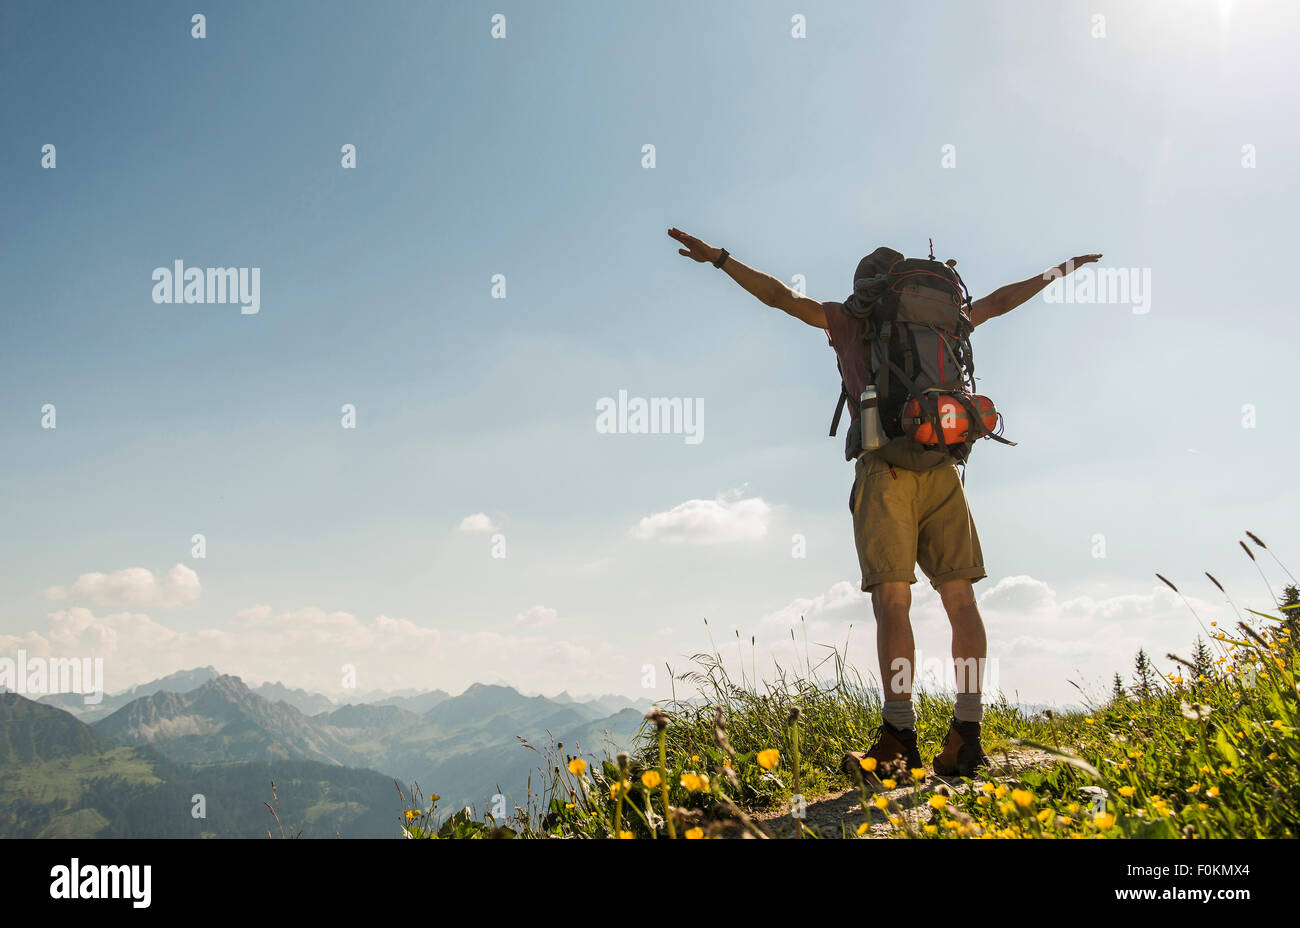 Austria, Tyrol, Tannheimer Tal, young man standing on mountain trail with arms outstretched Stock Photo